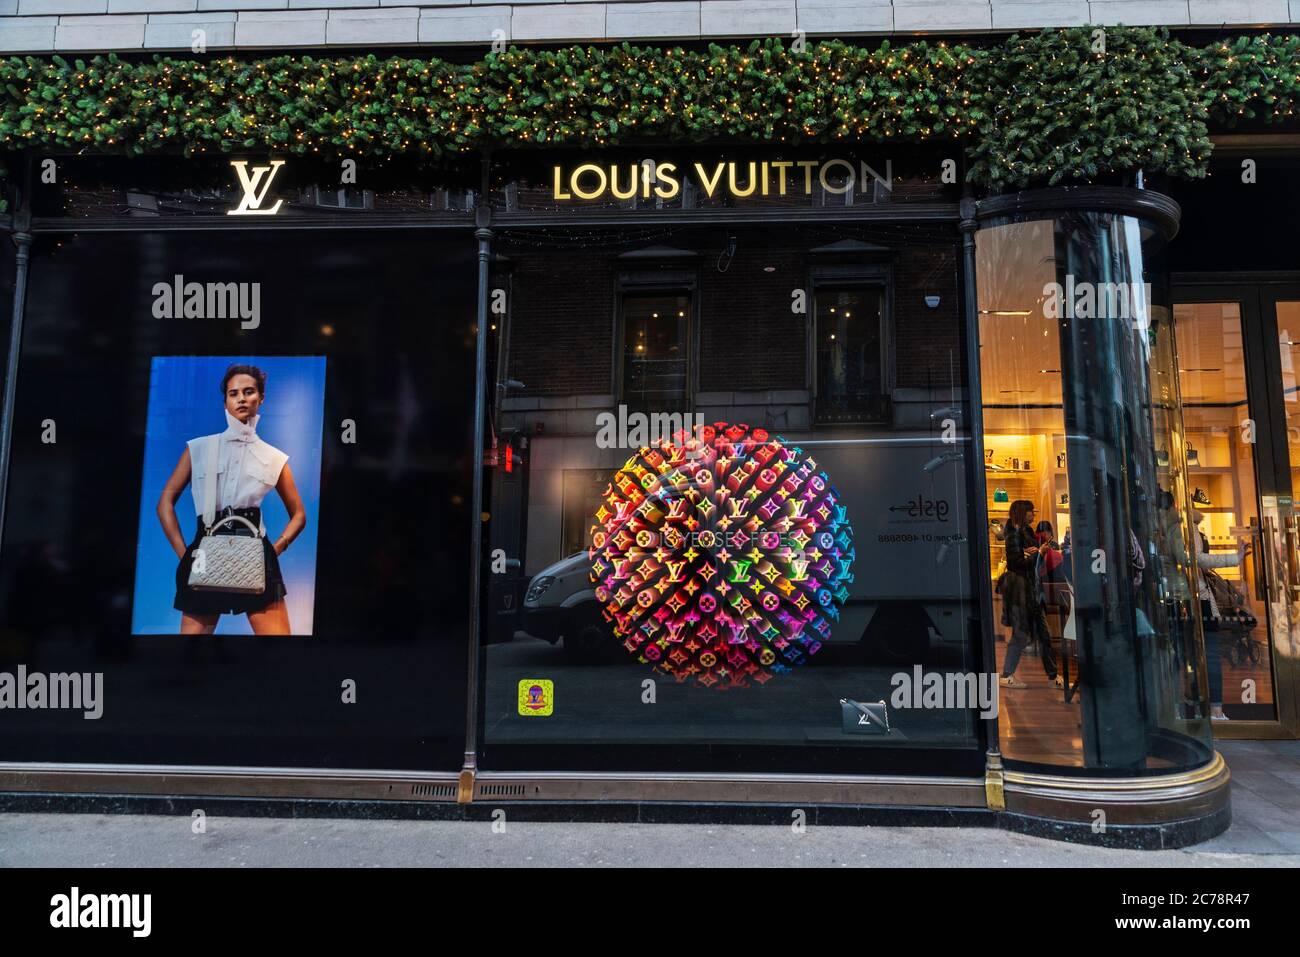 Moscow, Russia - December 1, 2019: Louis Vuitton storefront, multicolored  rainbow background backdrop design, glasses scarf and two bags with a logo.  Bright hologram fluorescent color – Stock Editorial Photo © OlaKorica  #327143390